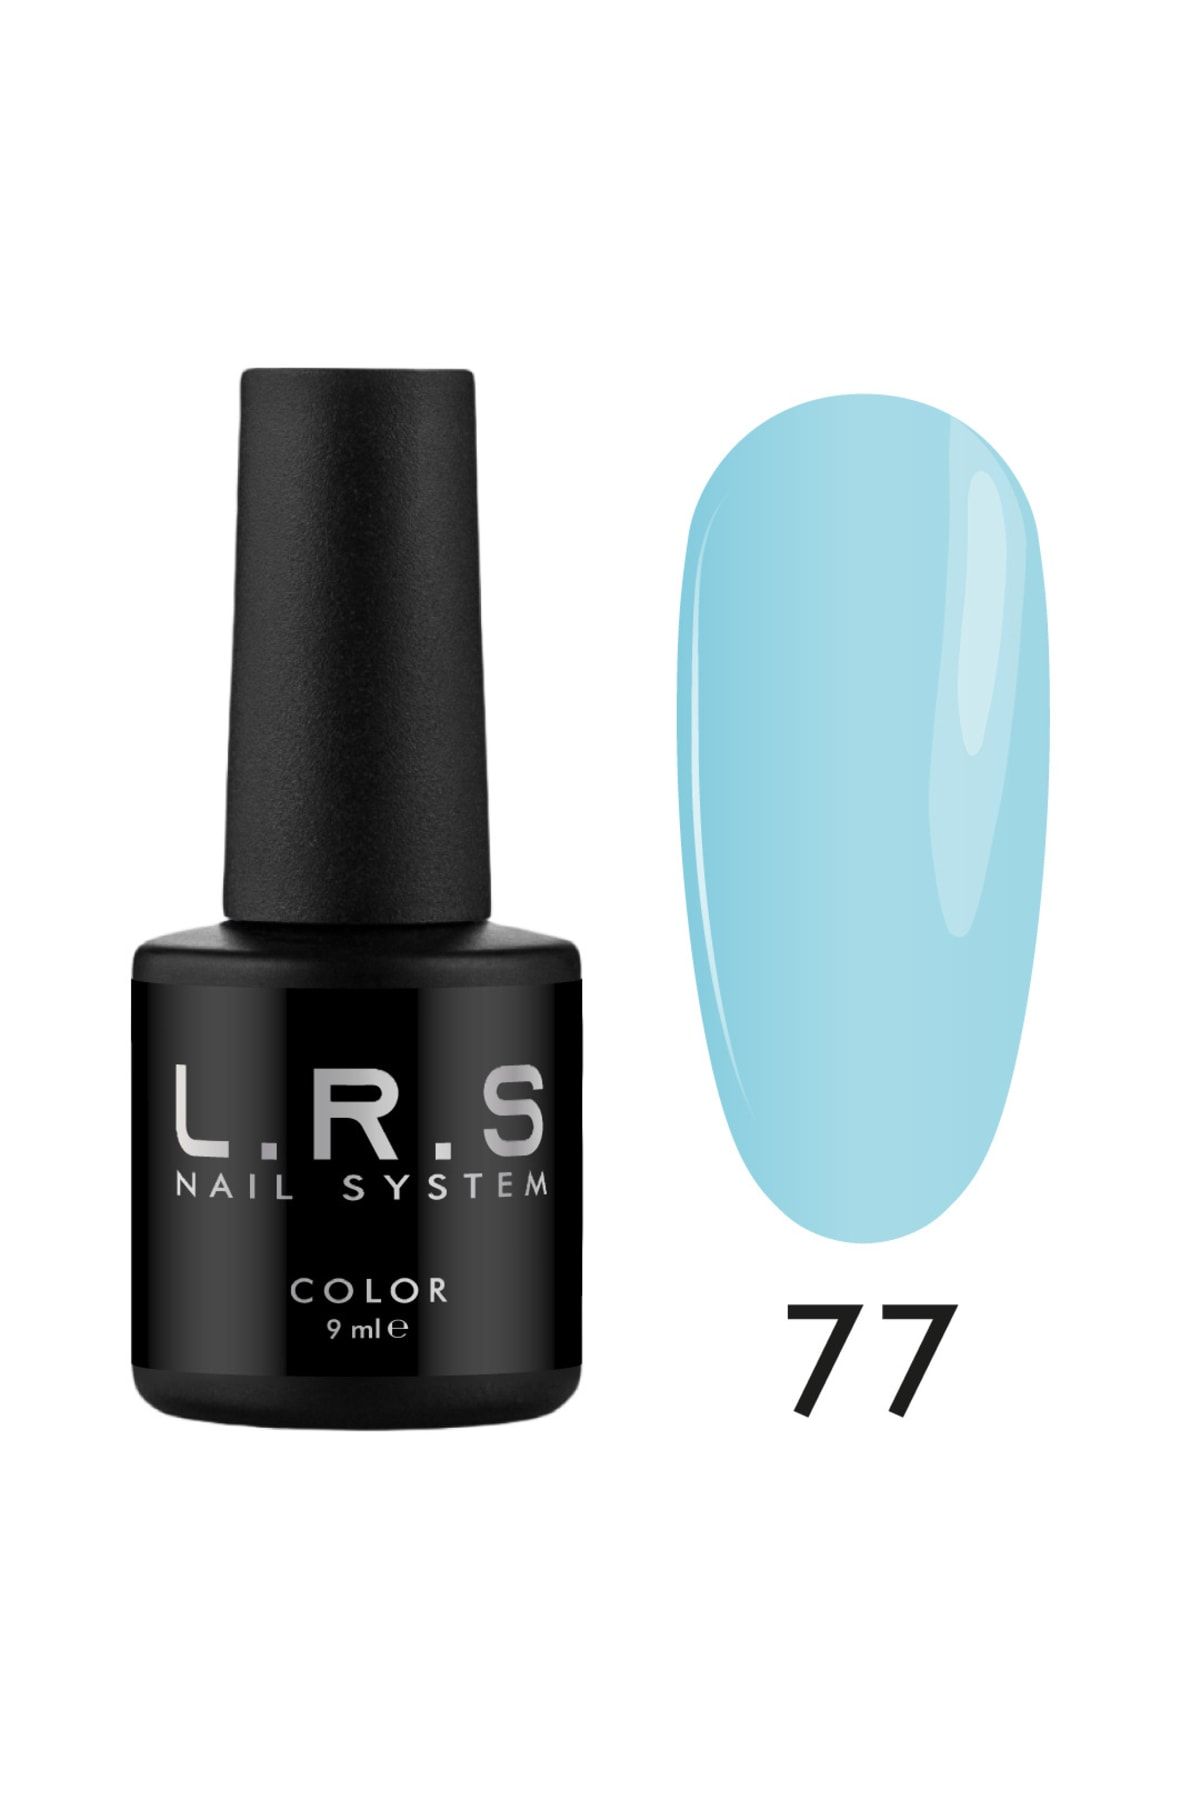 PNB Lrs Nail System 9ml Color 77